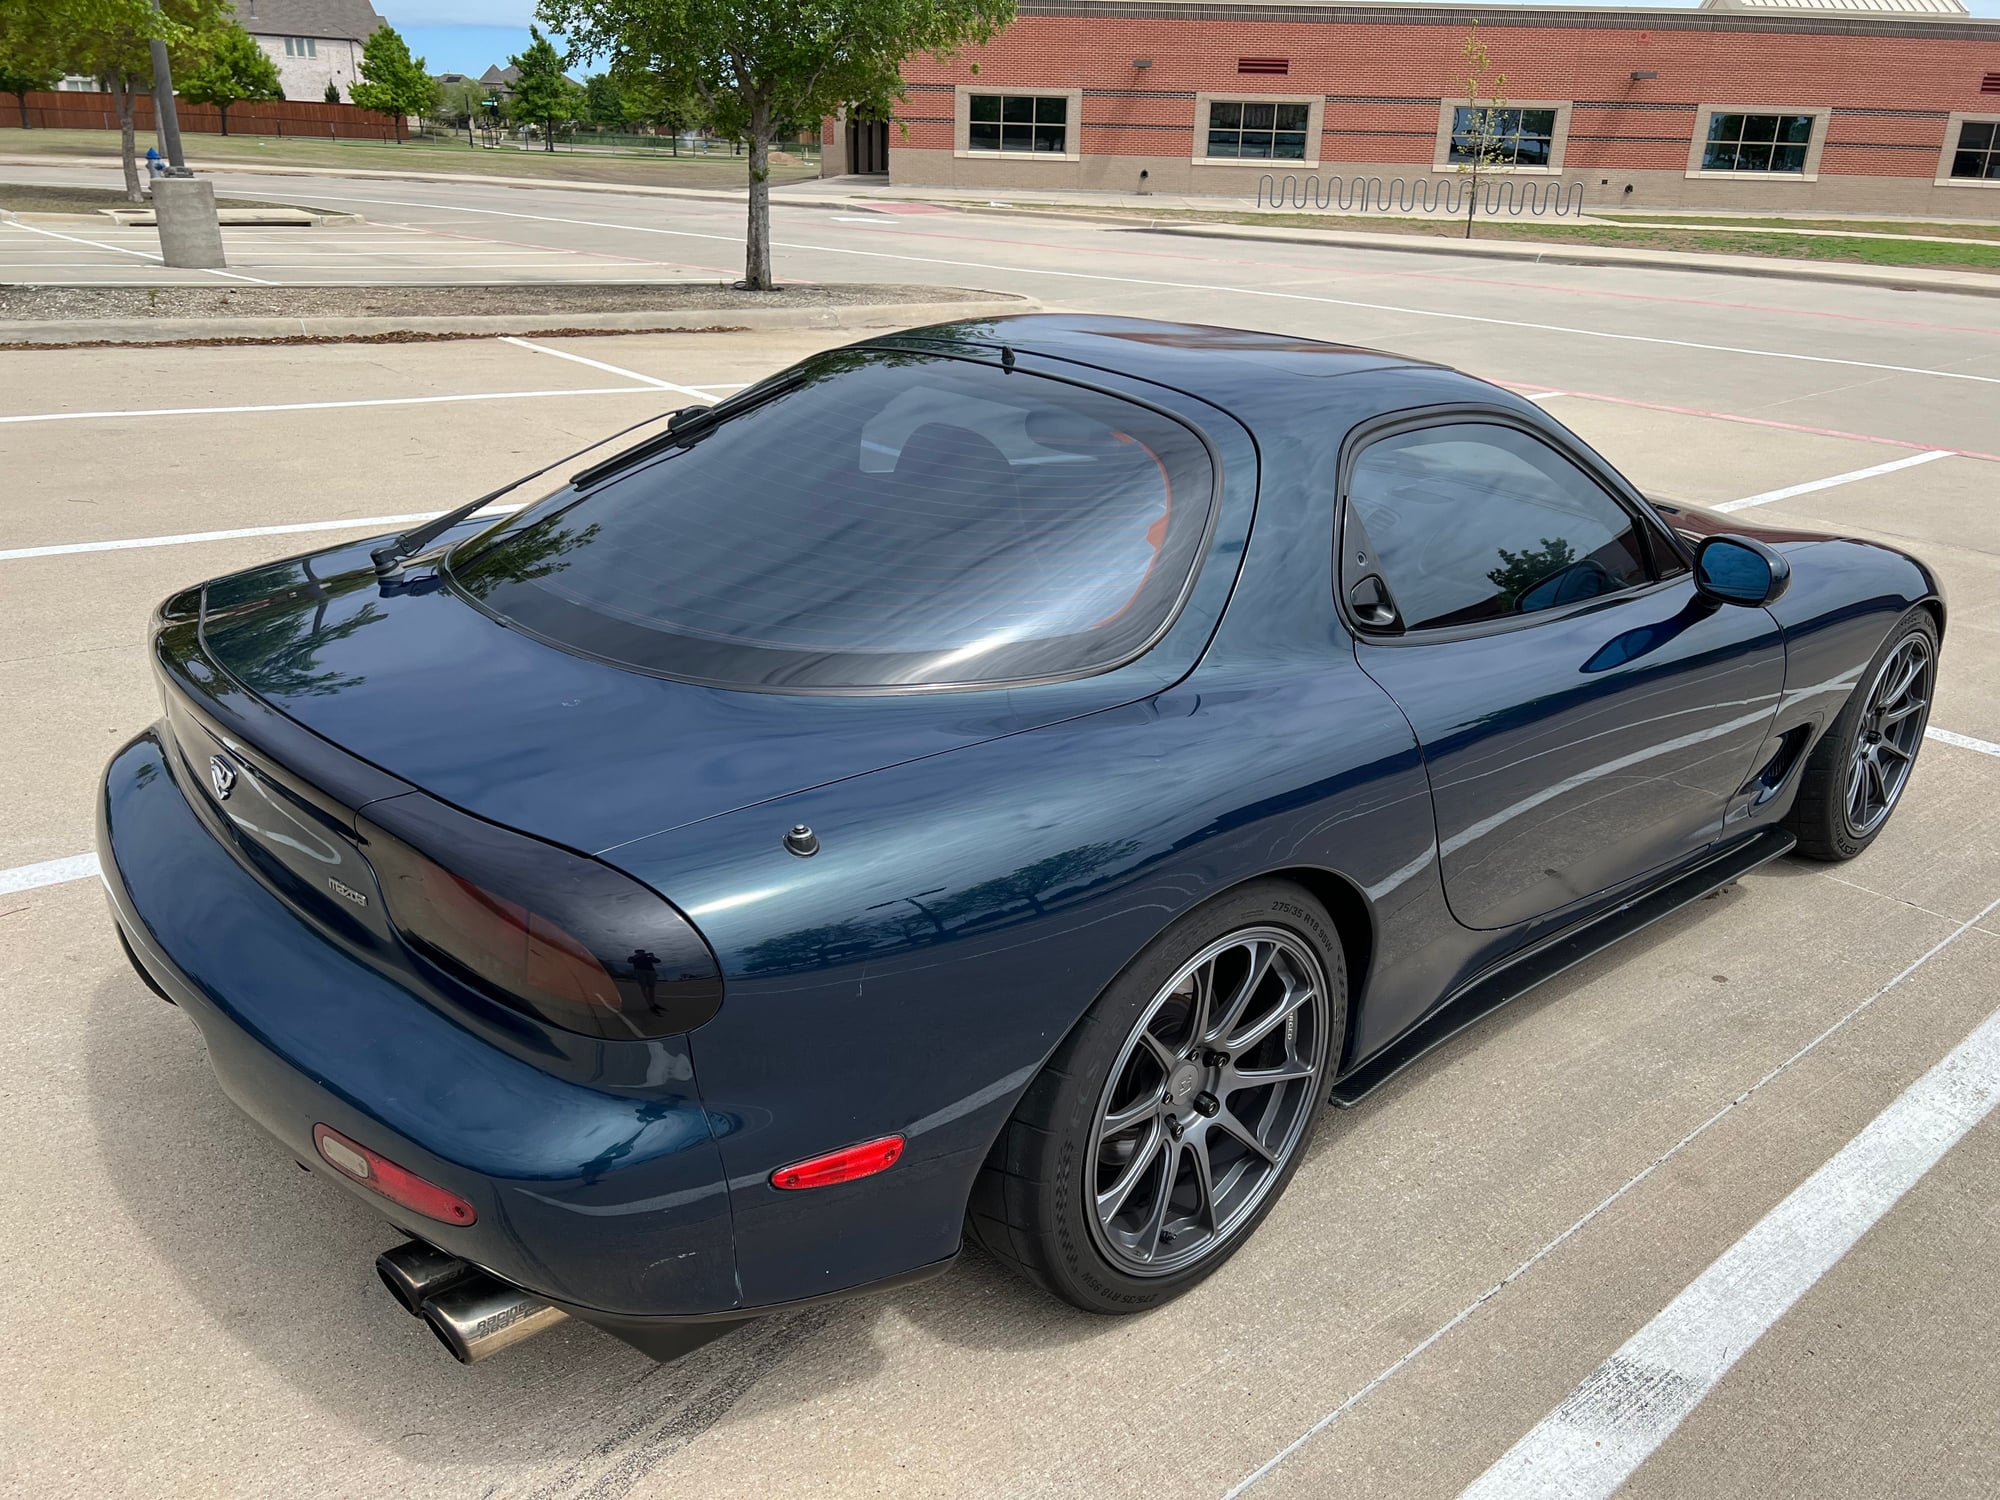 1994 Mazda RX-7 - 94' Rx7 Montego Blue Touring - Used - VIN JM1FD3335R0300930 - 116,214 Miles - Other - 2WD - Manual - Coupe - Blue - Mckinney, TX 75070, United States